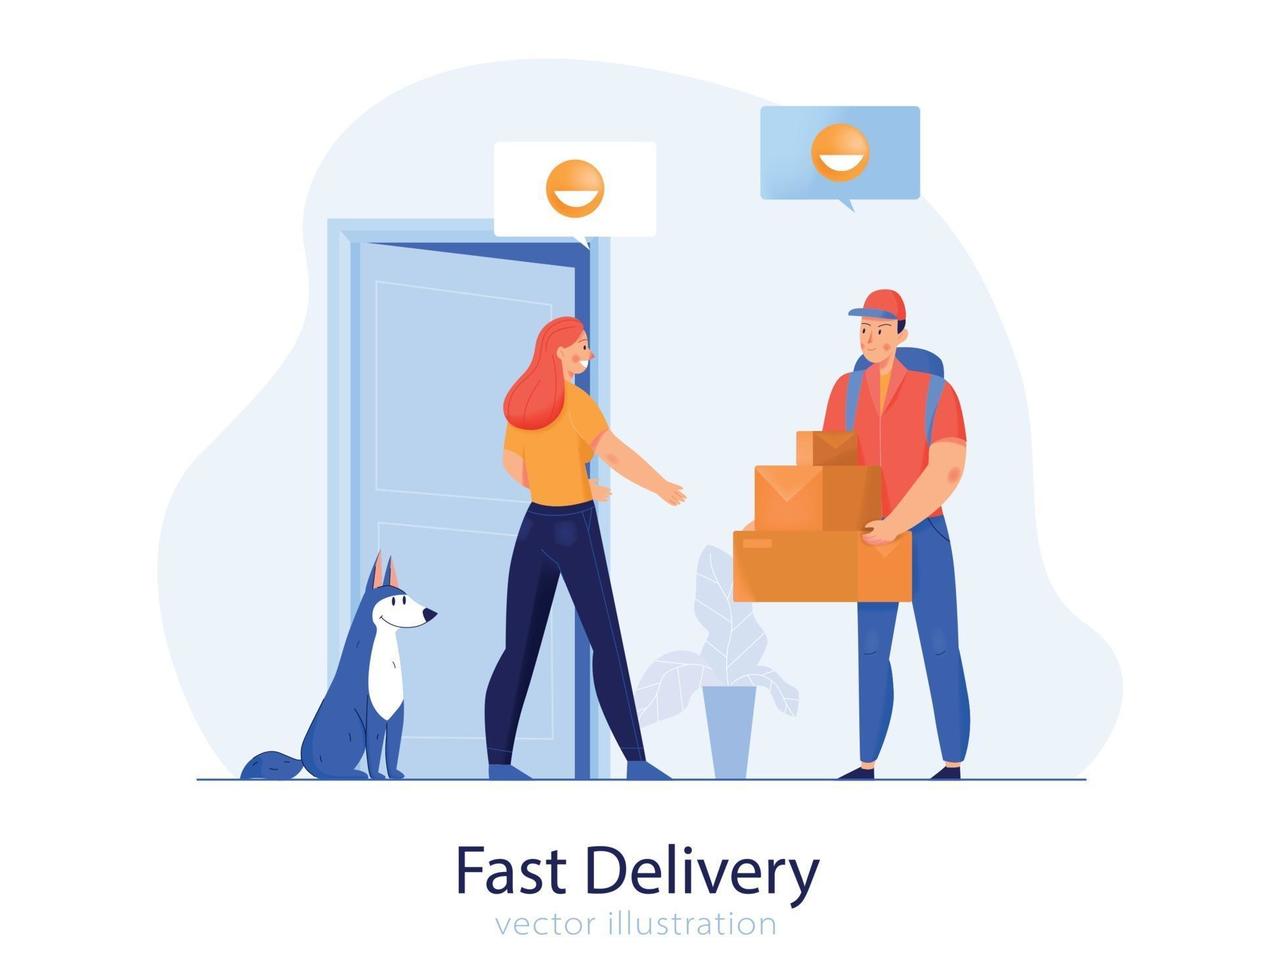 Fast Delivery Illustration vector